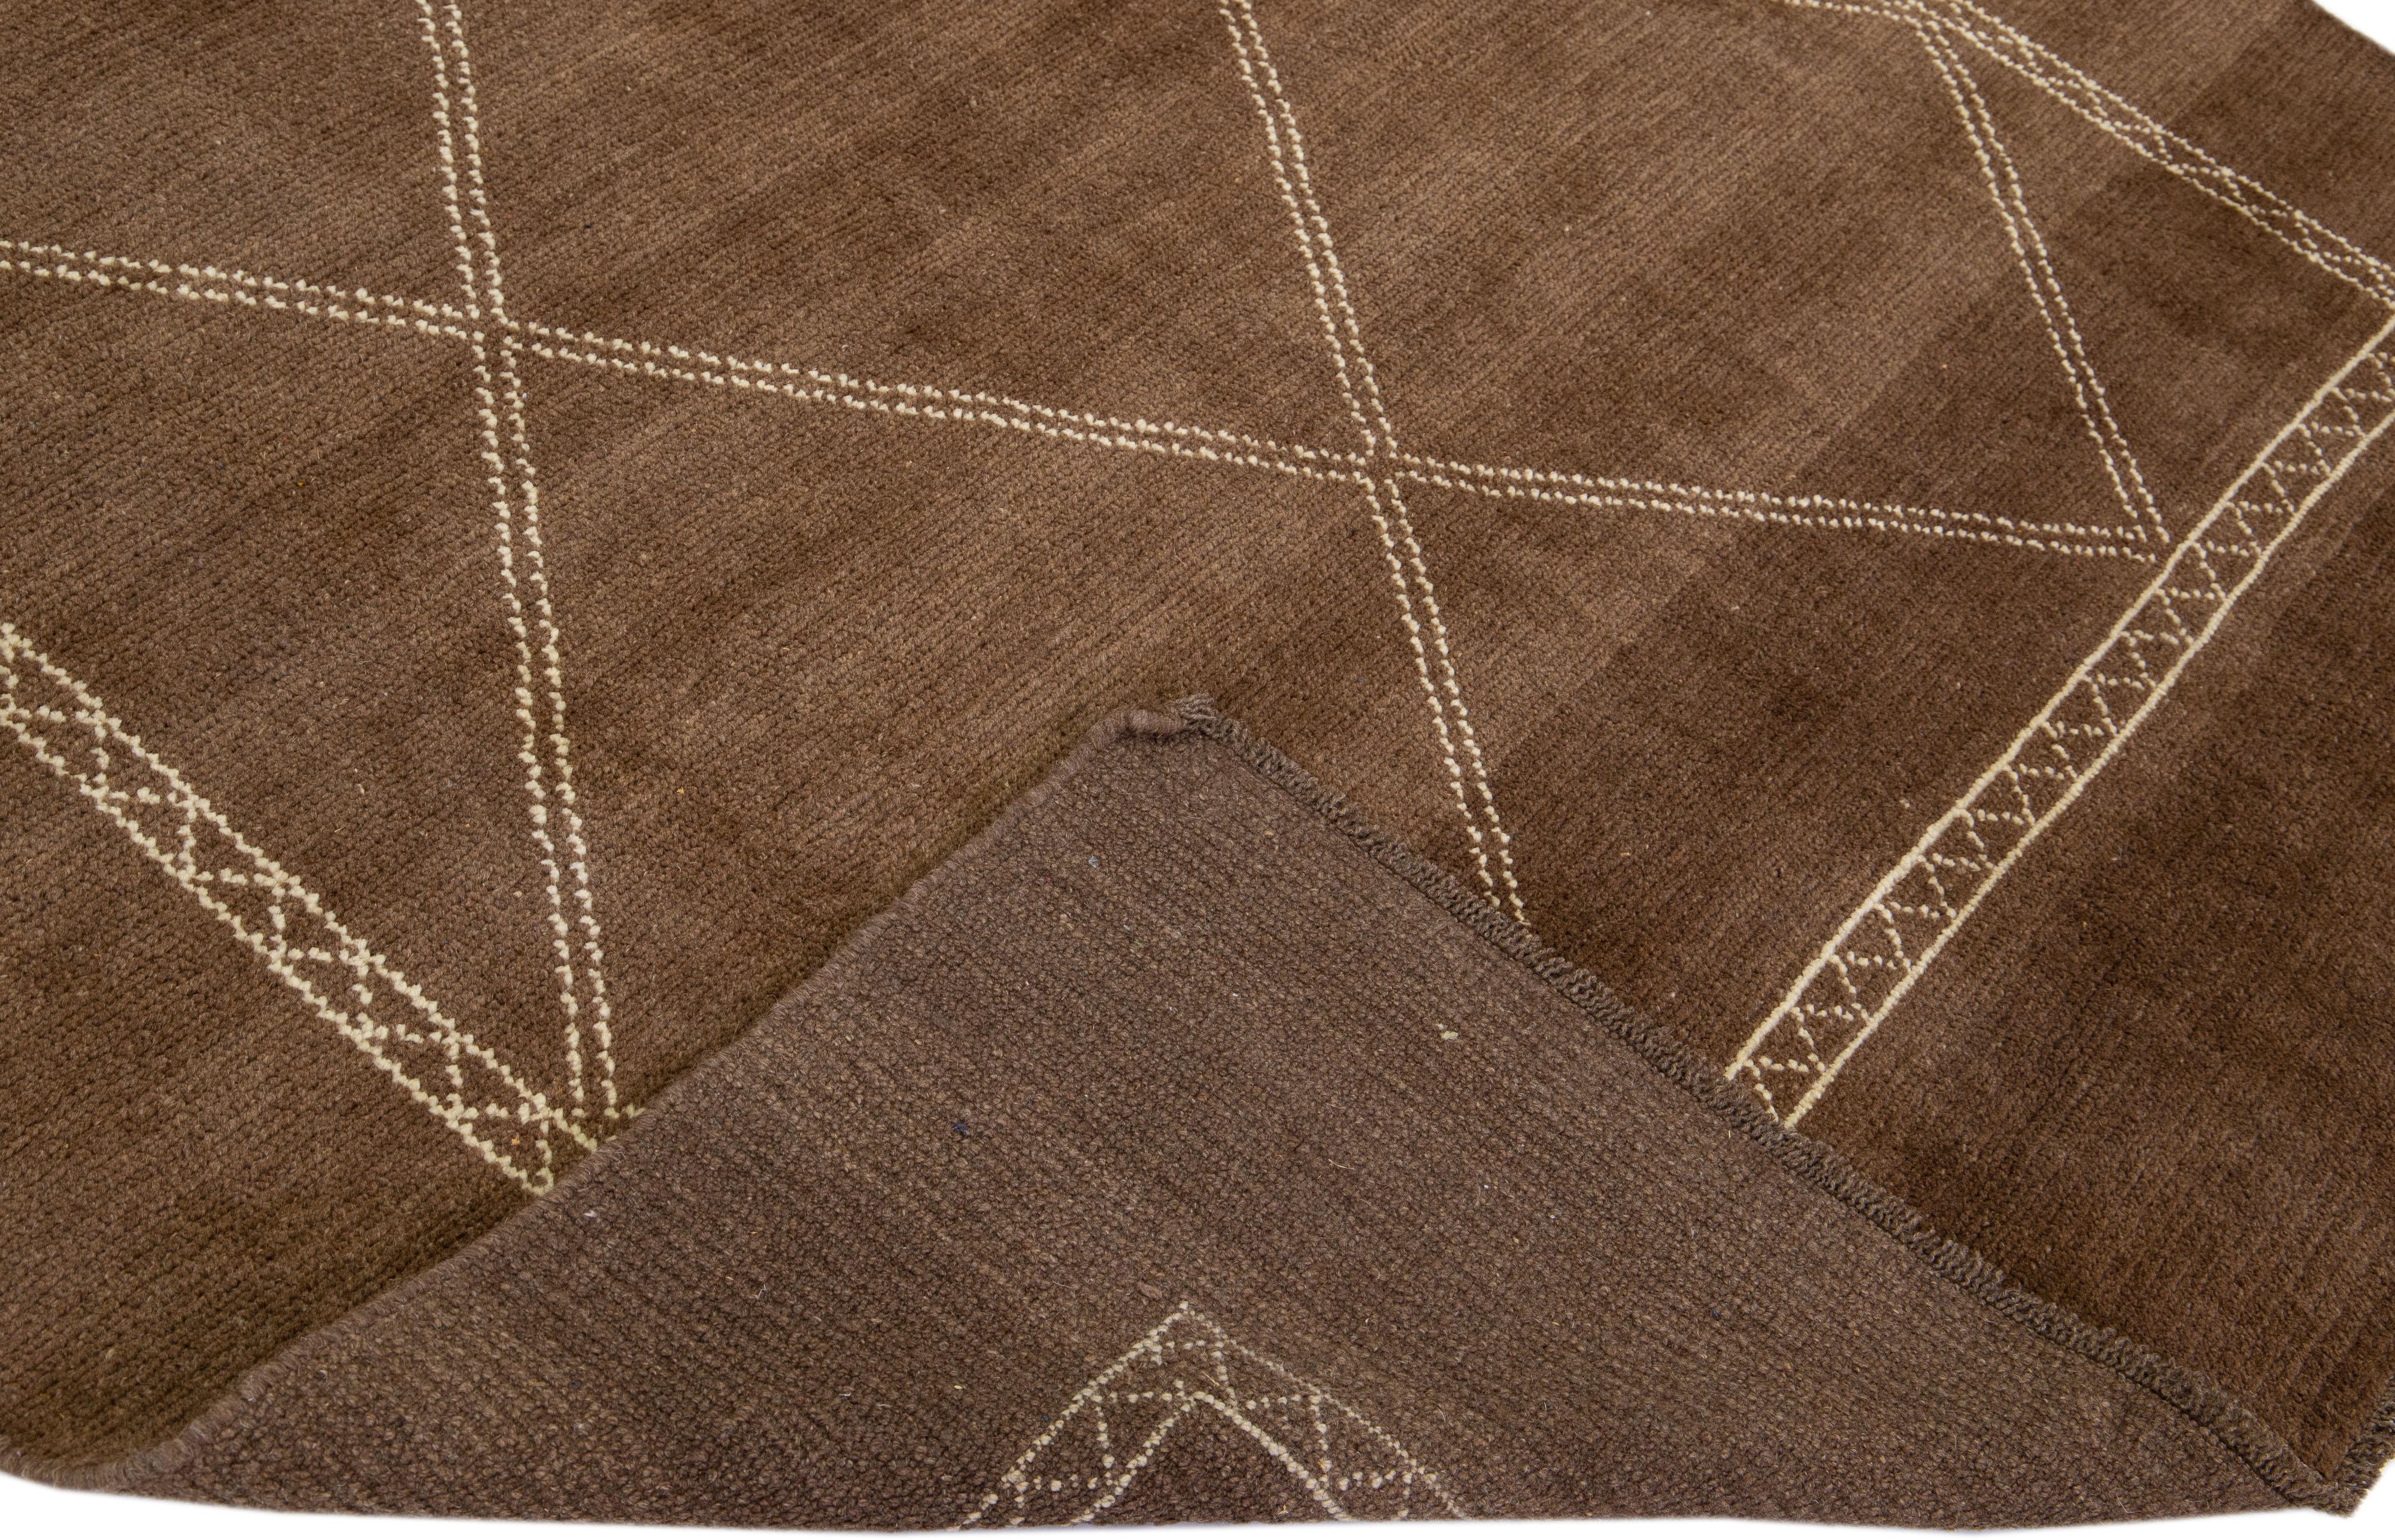 This Beautiful Moroccan-style handmade wool rug makes part of our Northwest collection and features a brown color field and beige accents in a gorgeous geometric tribal design.

This rug measures: 6'6